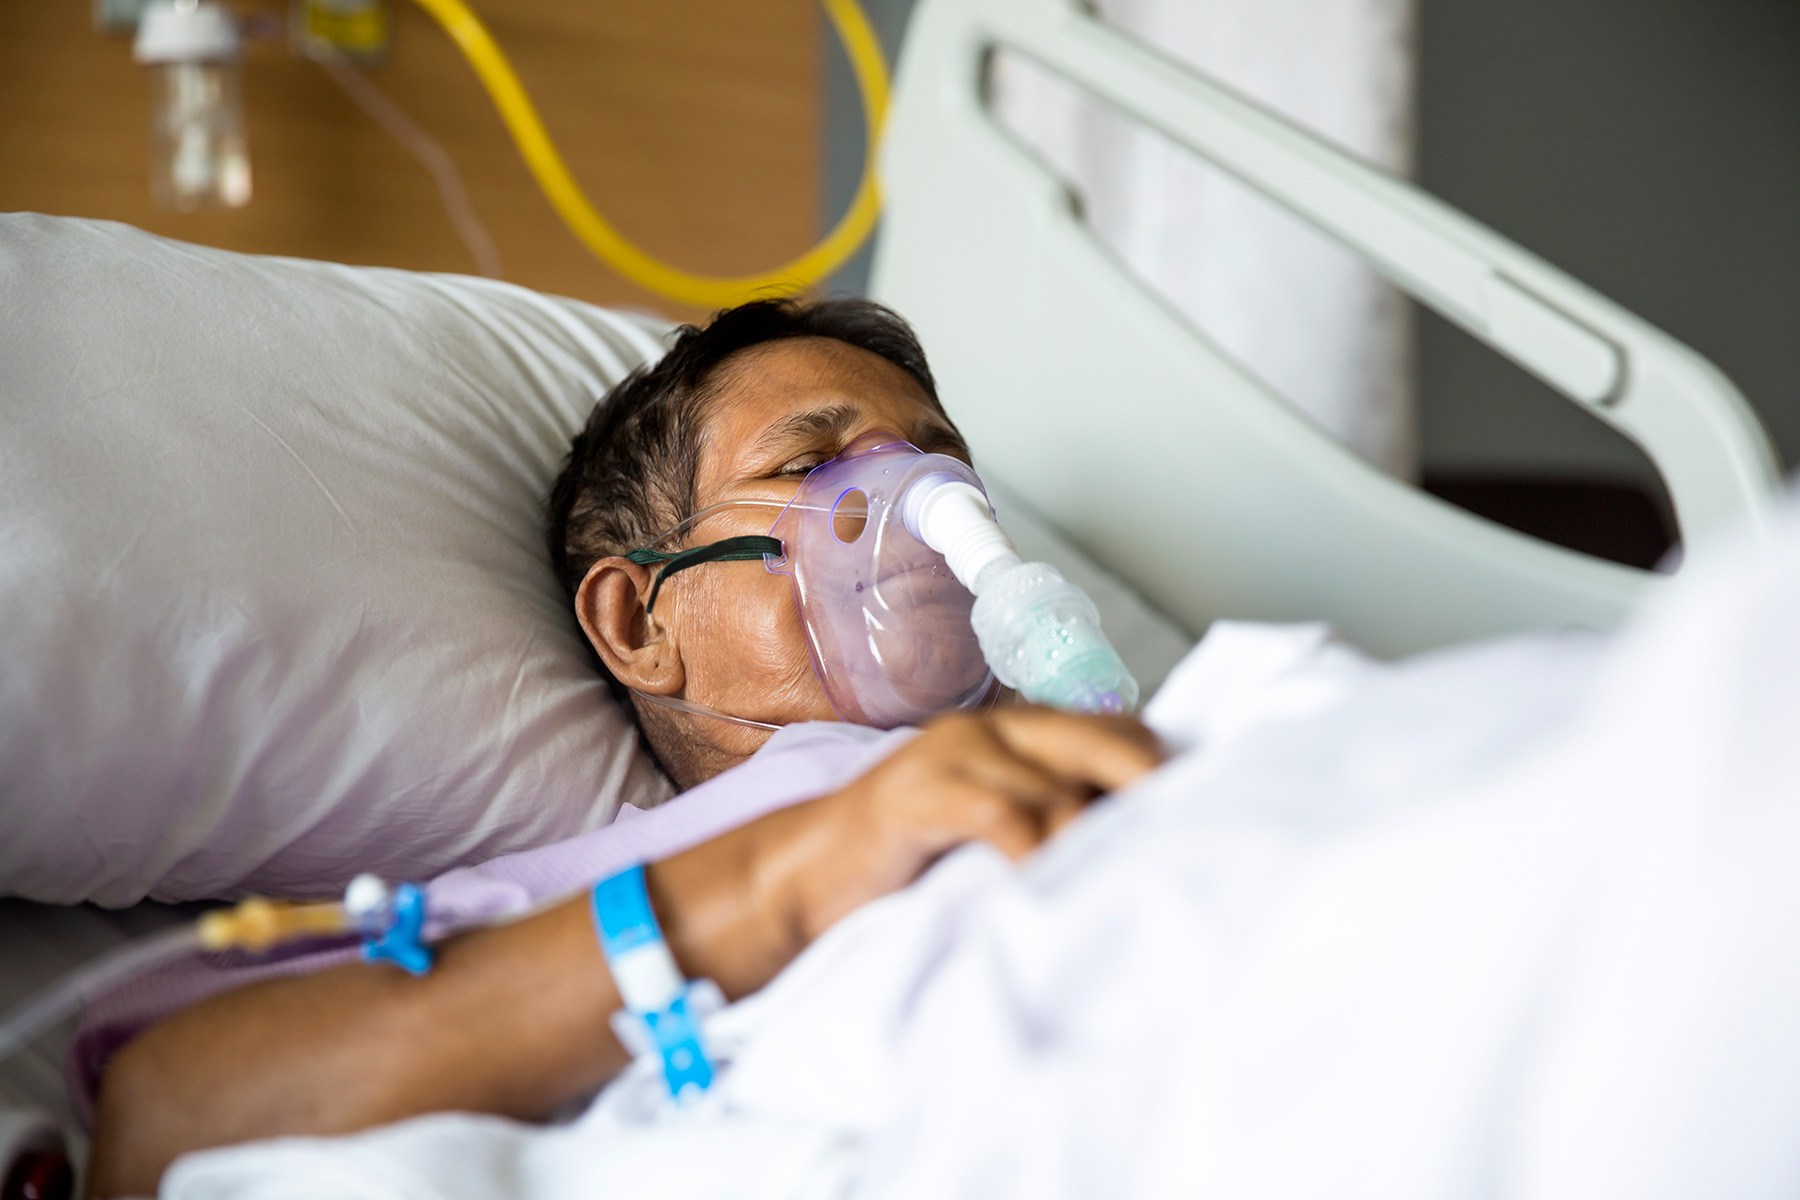 Race Doesn’t Impact COVID Survival Rate in Hospital